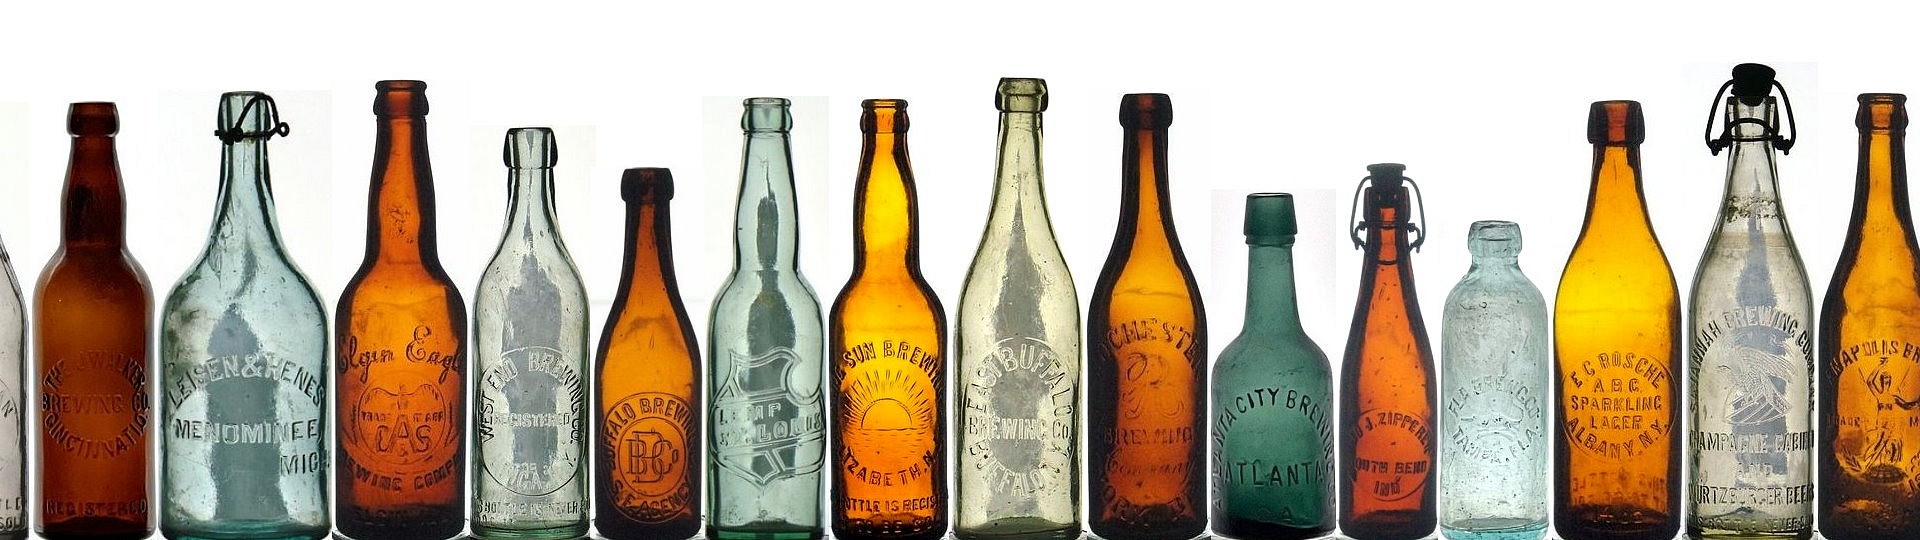 TavernTrove's Antique American Beer Bottle Auction by TavernTrove